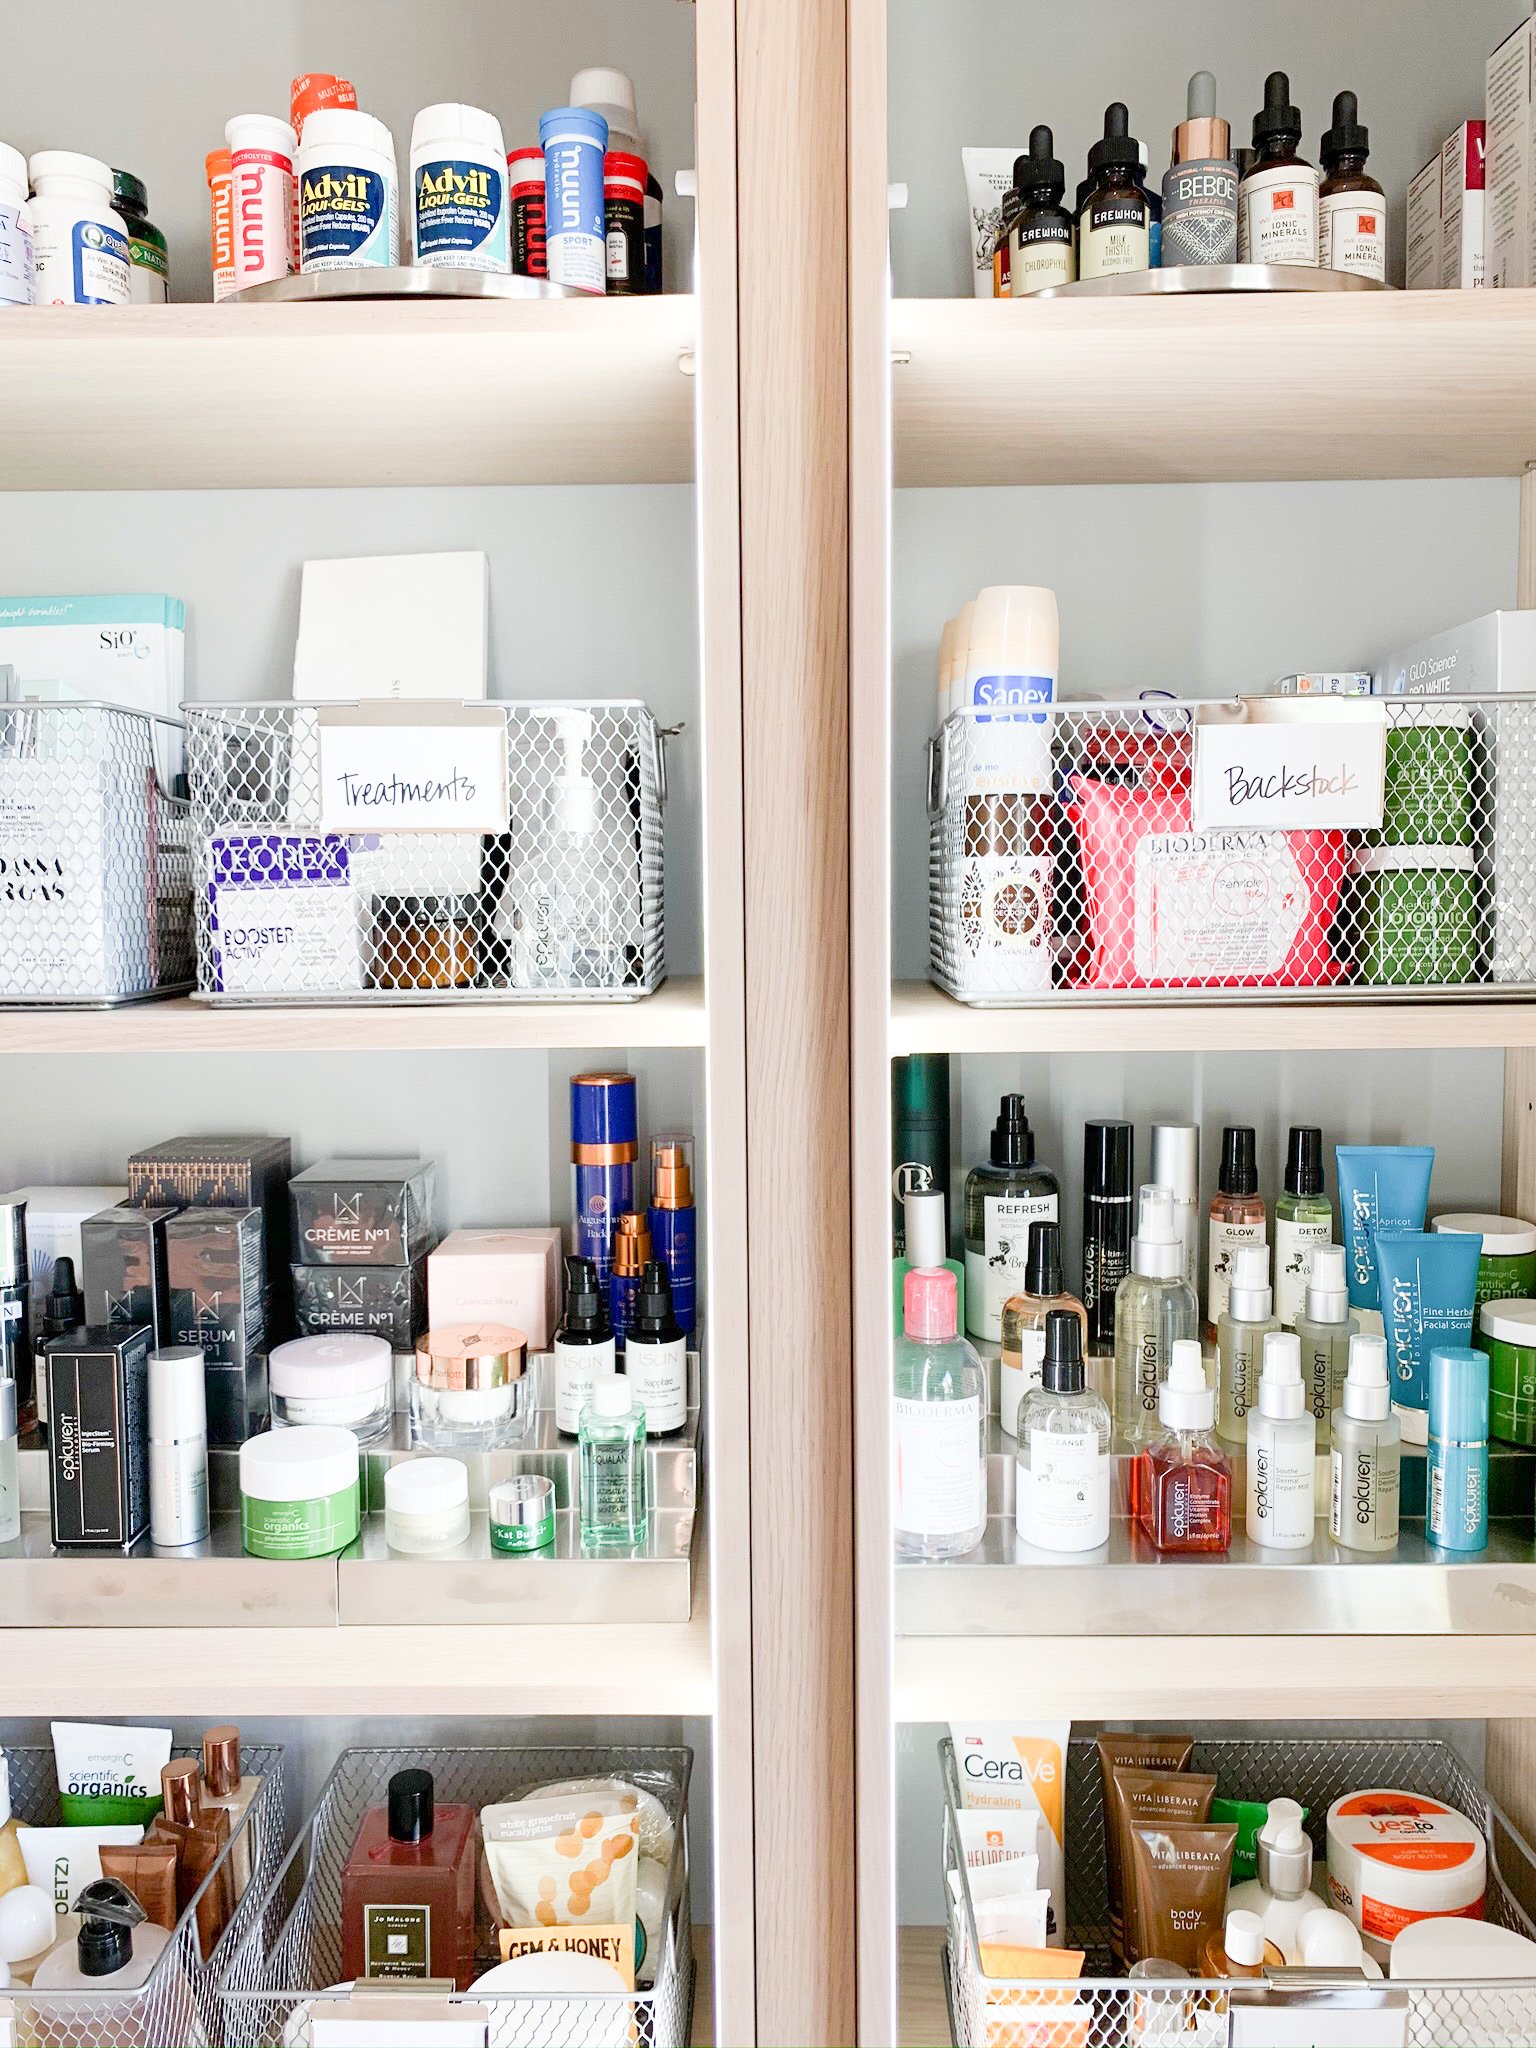 Supplies, tips and ideas for organizing bathroom drawers and